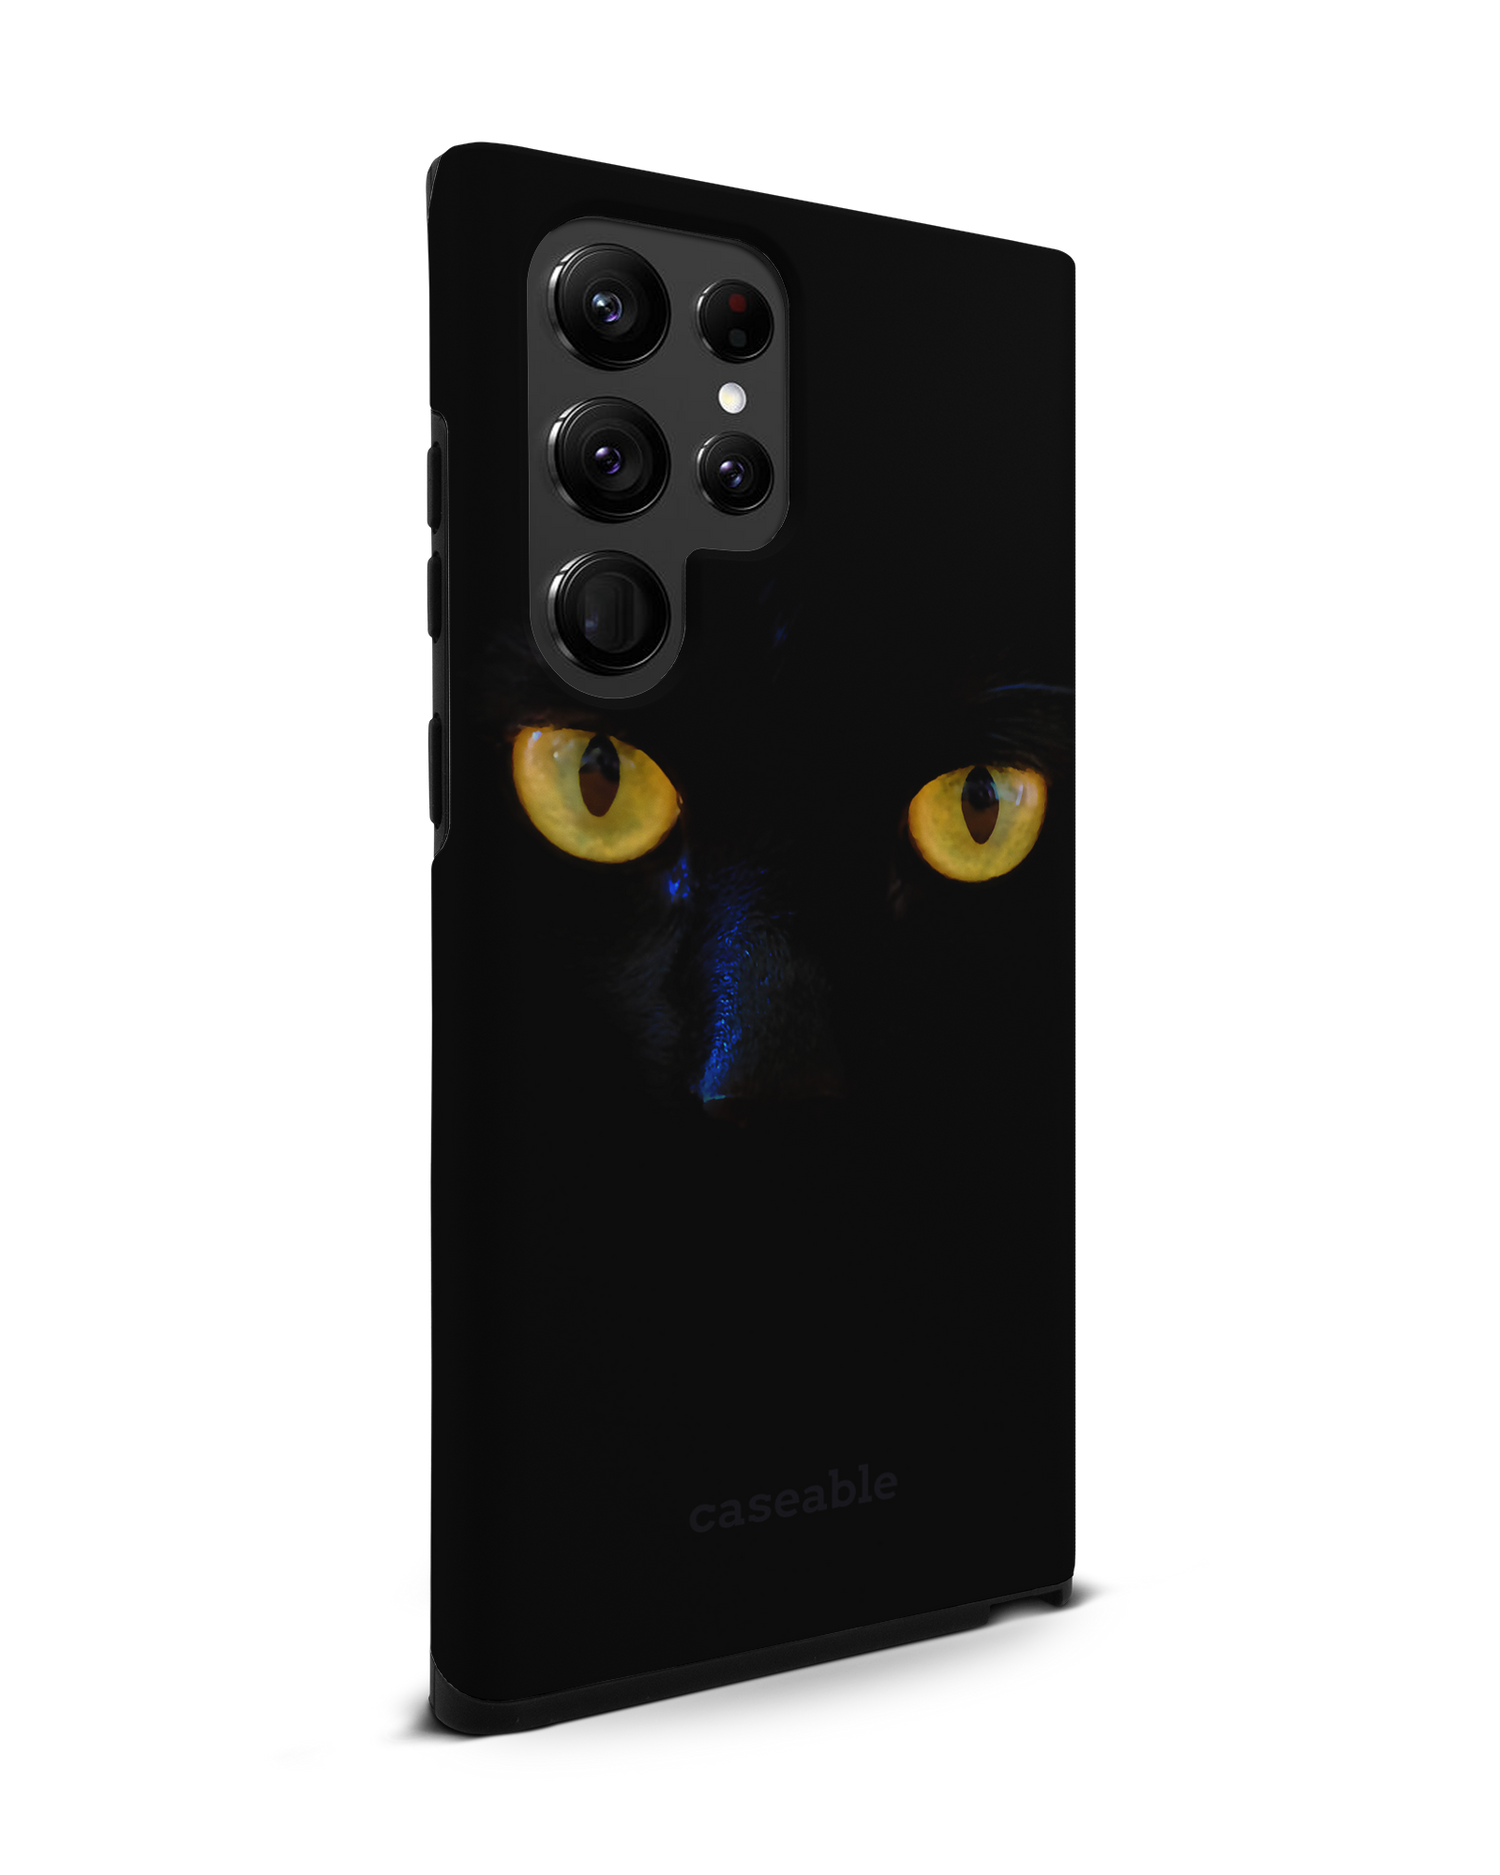 Black Cat Premium Phone Case Samsung Galaxy S22 Ultra 5G: View from the left side